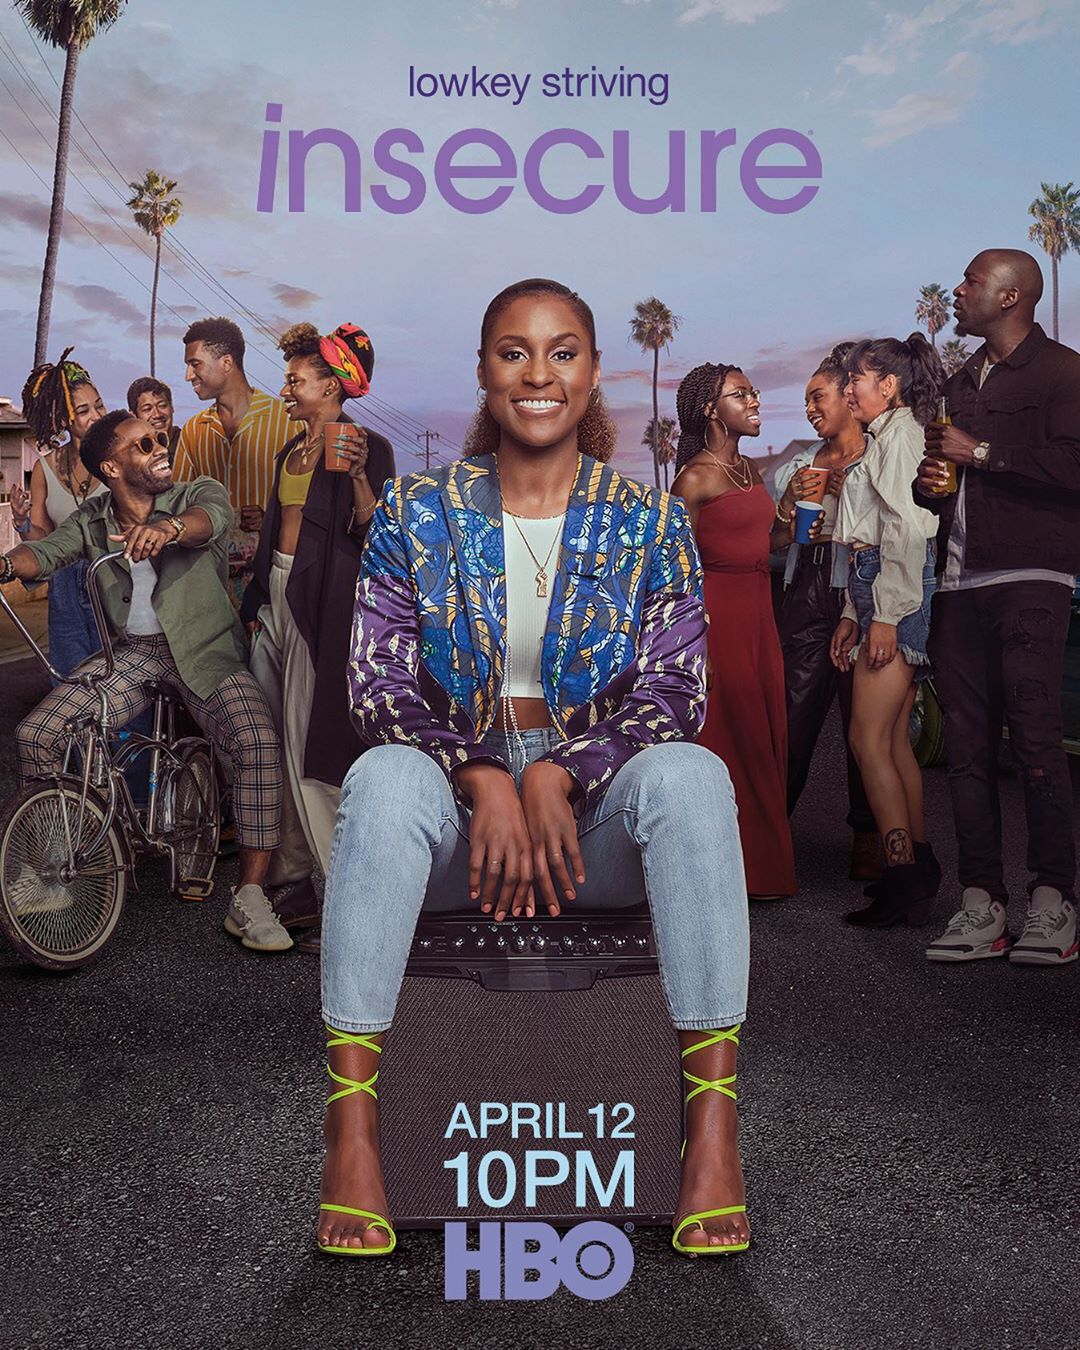 First Look: Insecure Season 4 Starring Issa Rae